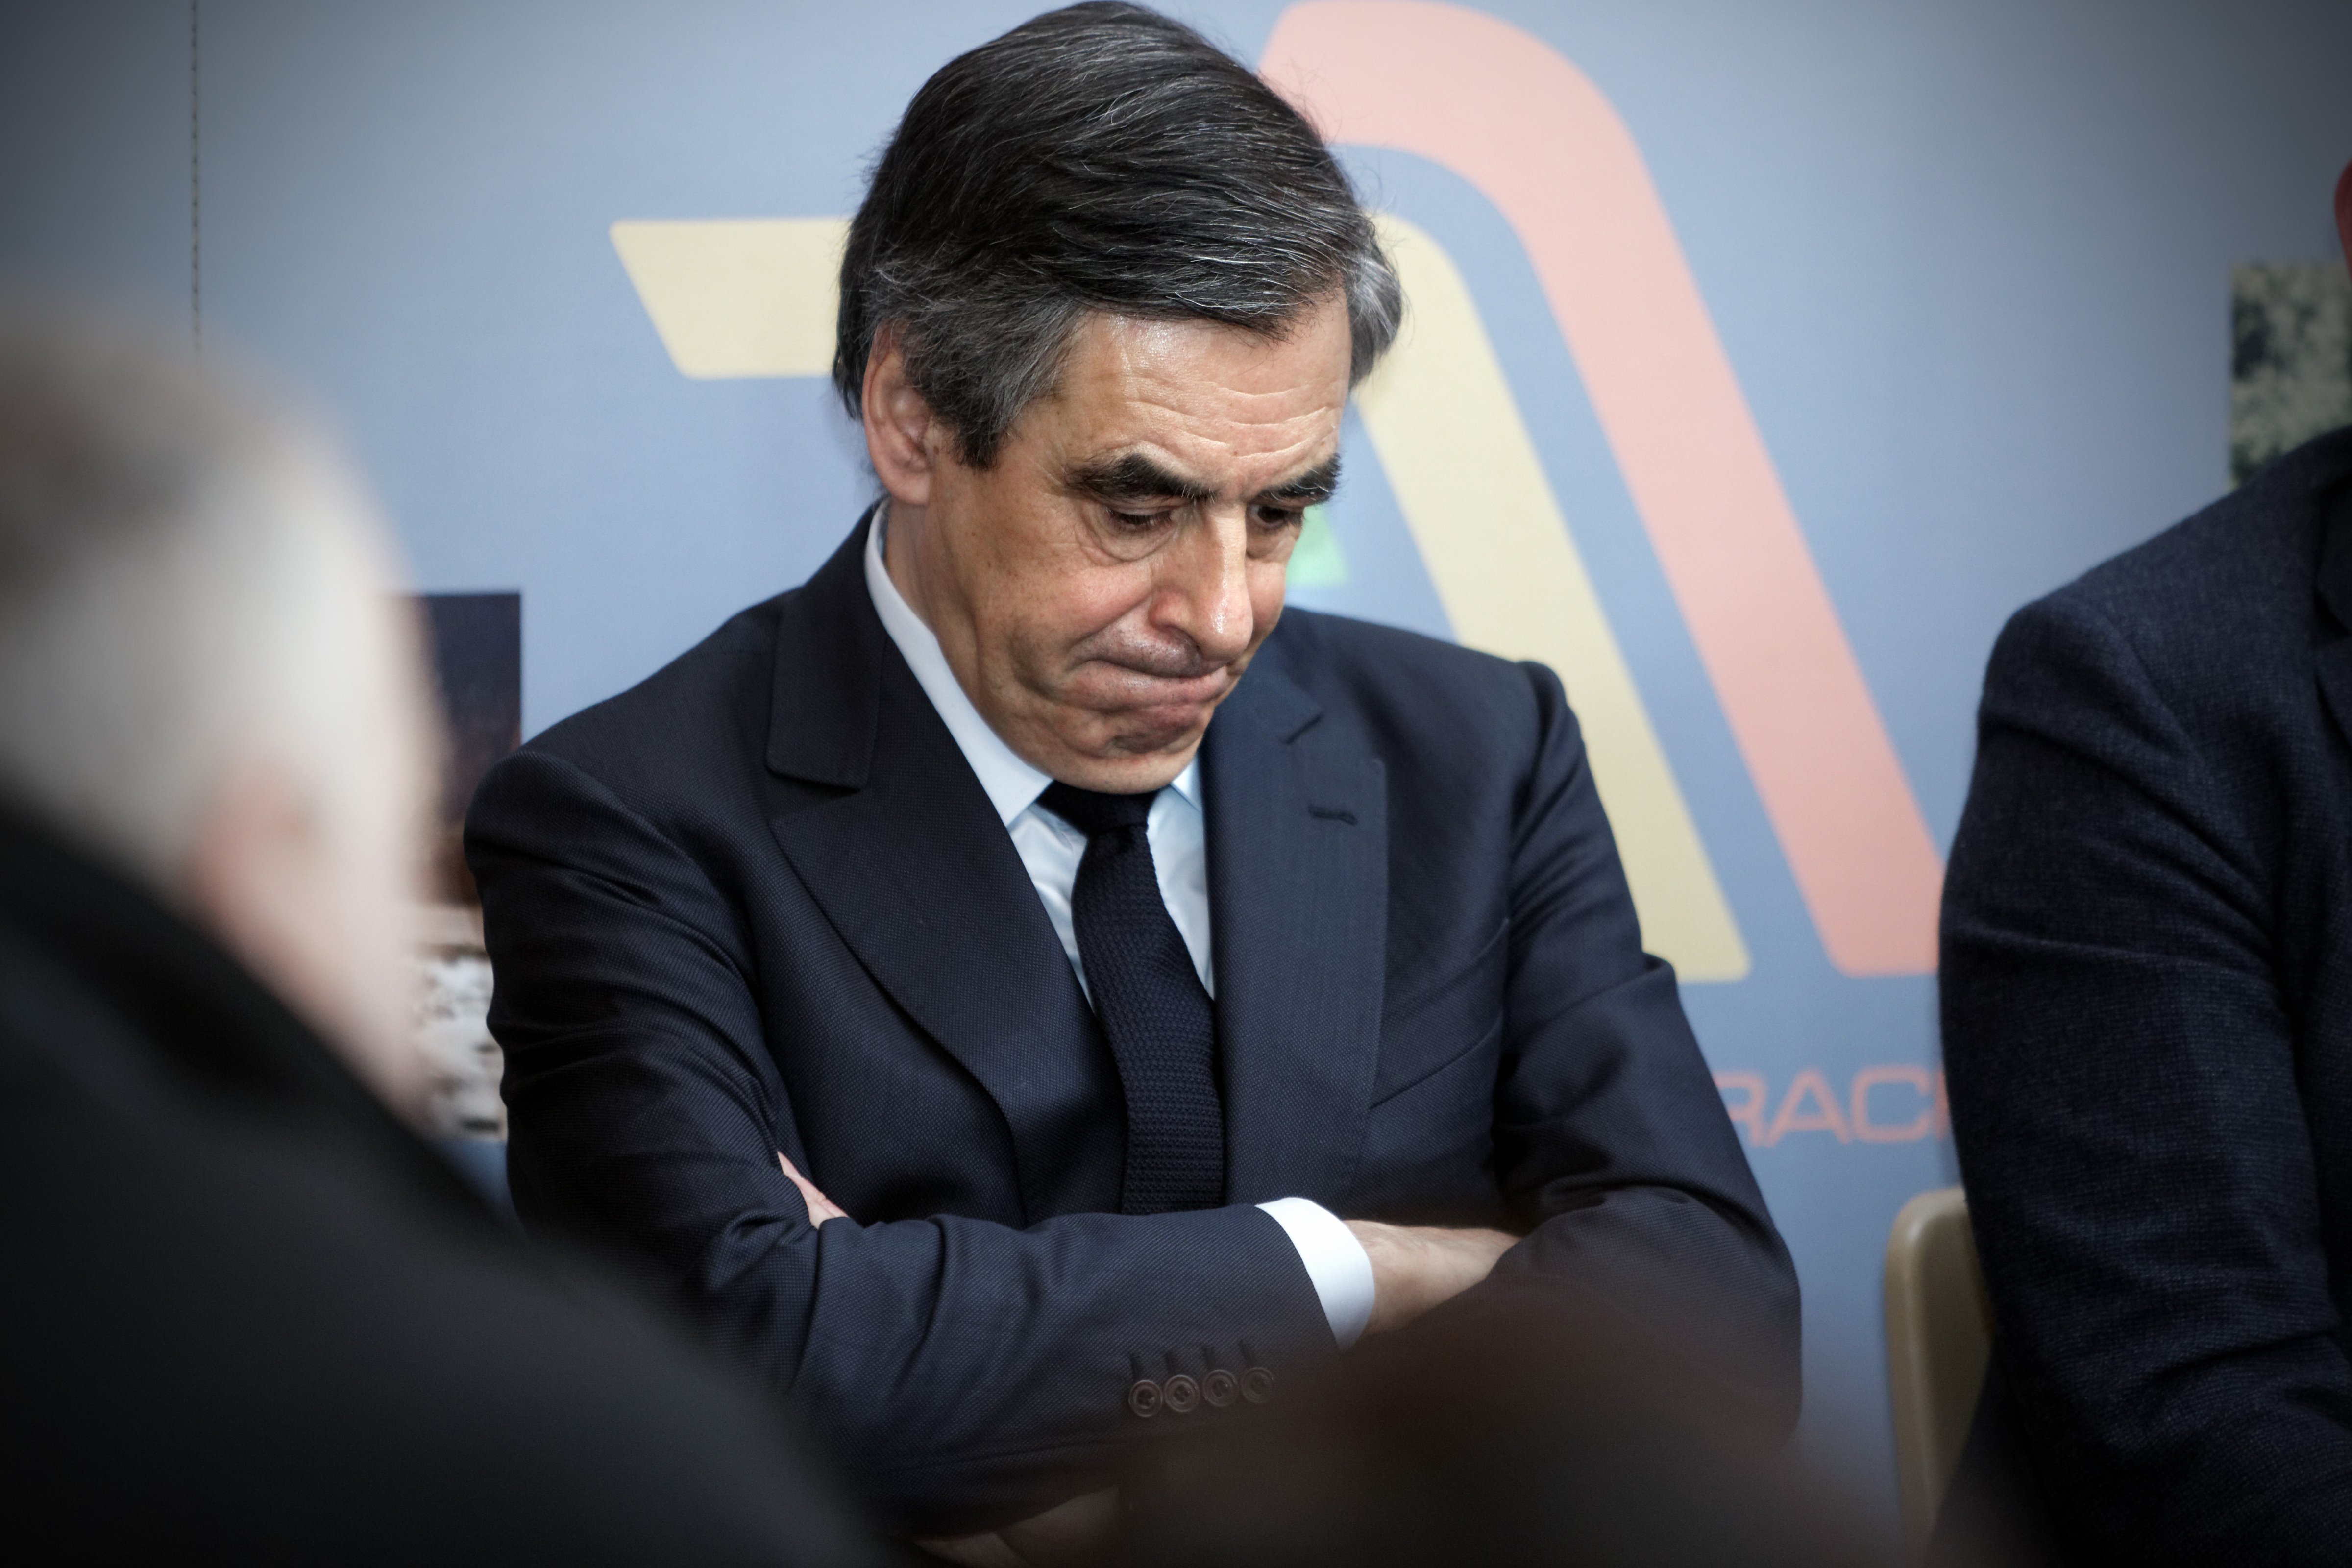 Former French Prime Minister Francois Fillon meets with farmers in Liart near Charleville-Mezieres, France on Feb. 2, 2017. (Sylvain Lefevre—Getty Images)